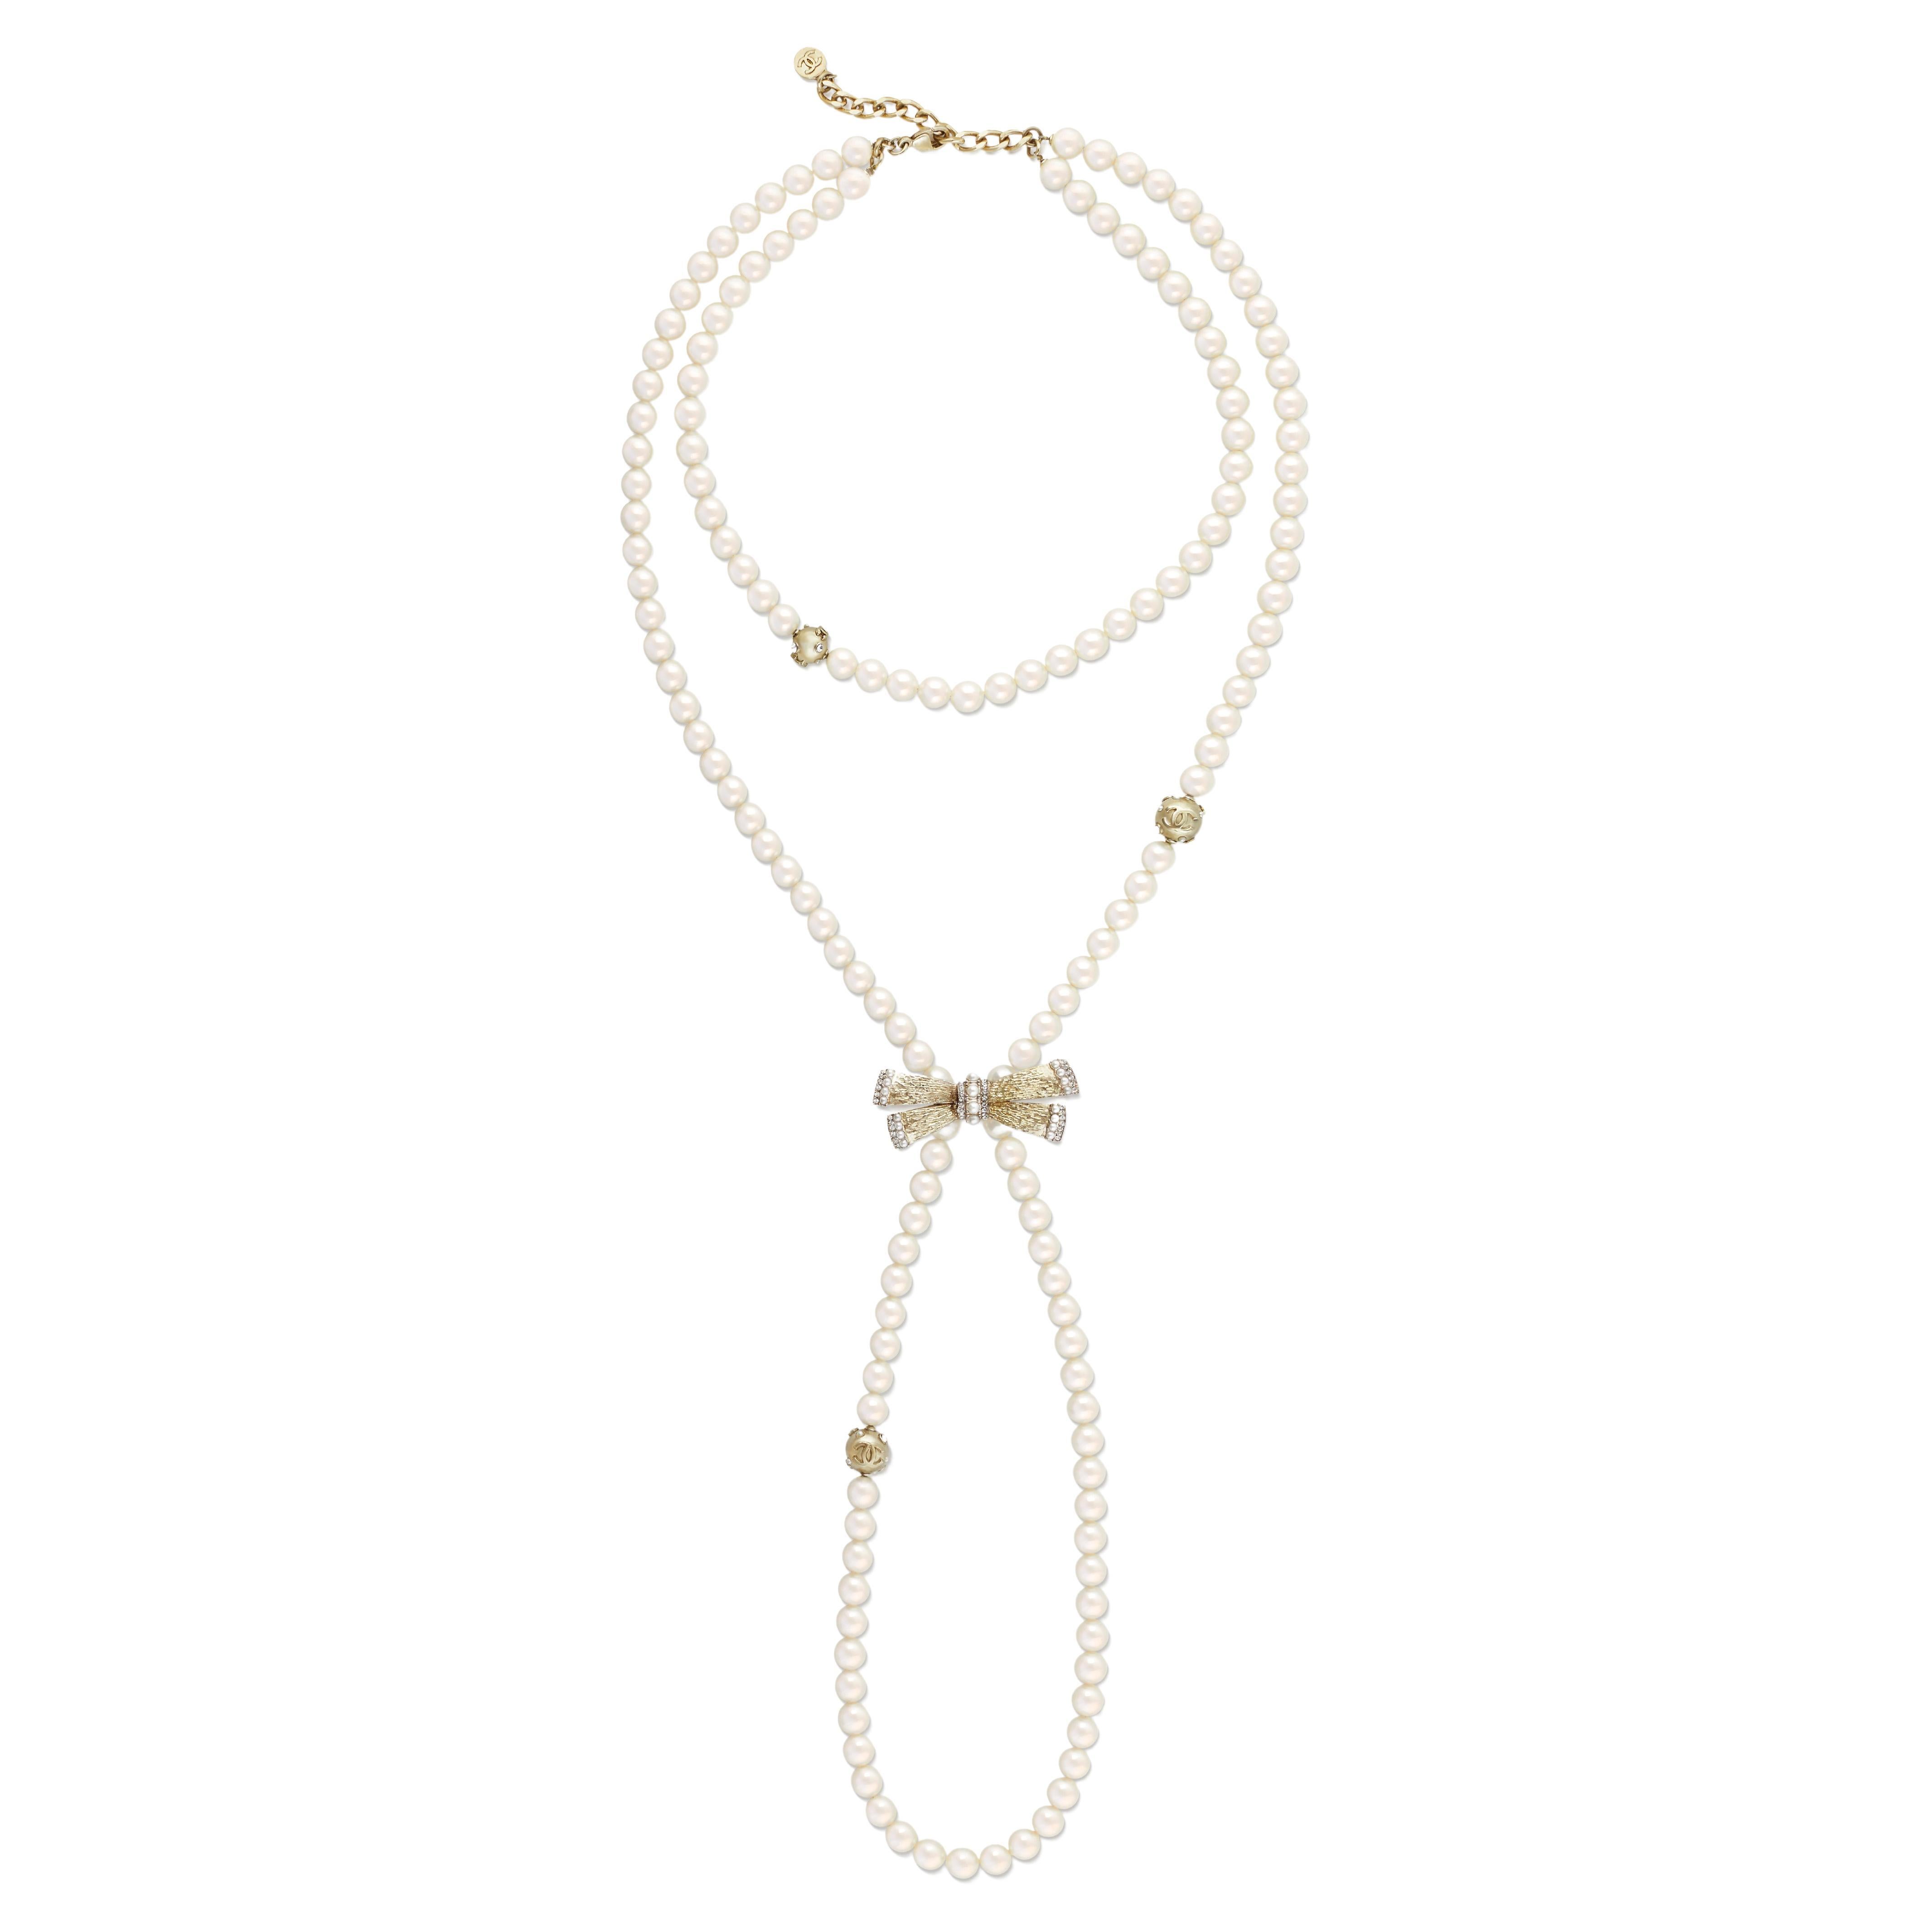 Chanel double strand faux pearl sautoir necklace with bow and CC logo stations, from Spring/Summer 2006. This classic Chanel necklace features a double strand of faux pearls, one choker length and the other long and bound with a crystal and